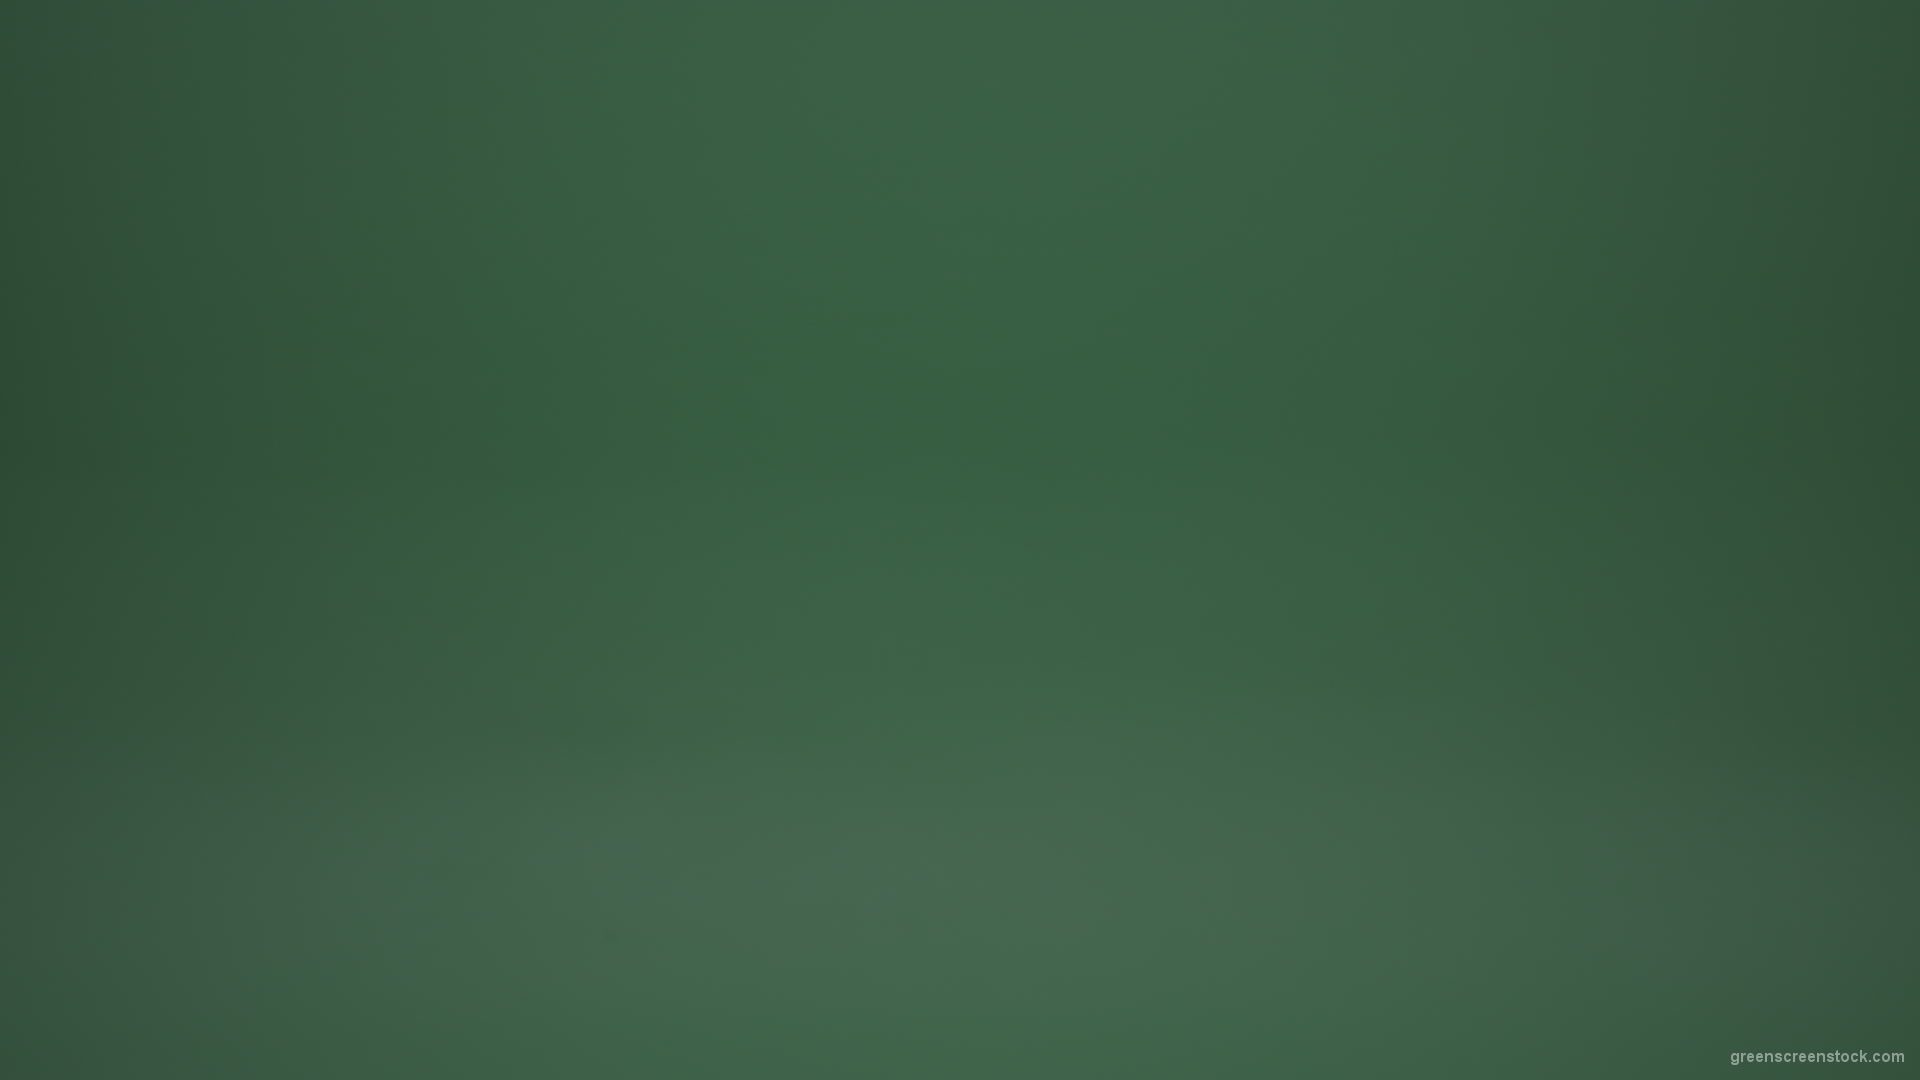 Rapidly-Clapping-Young-FemaleHands-Ovation-GreenScreenWall-ChromaKey-Background_001 Green Screen Stock